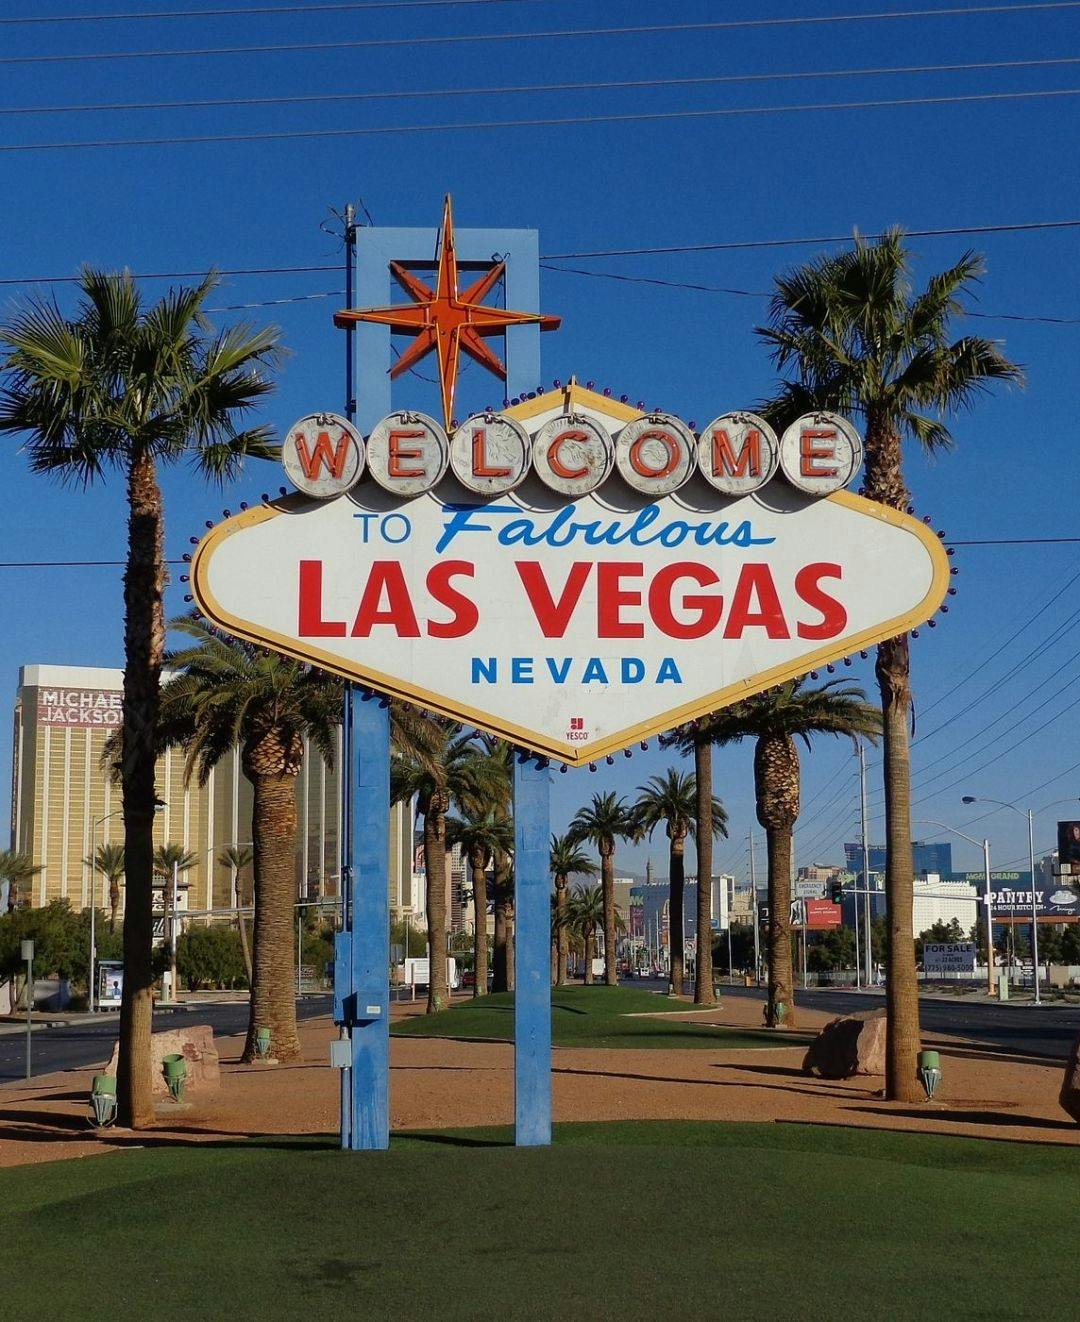 The welcome to Las Vegas sign